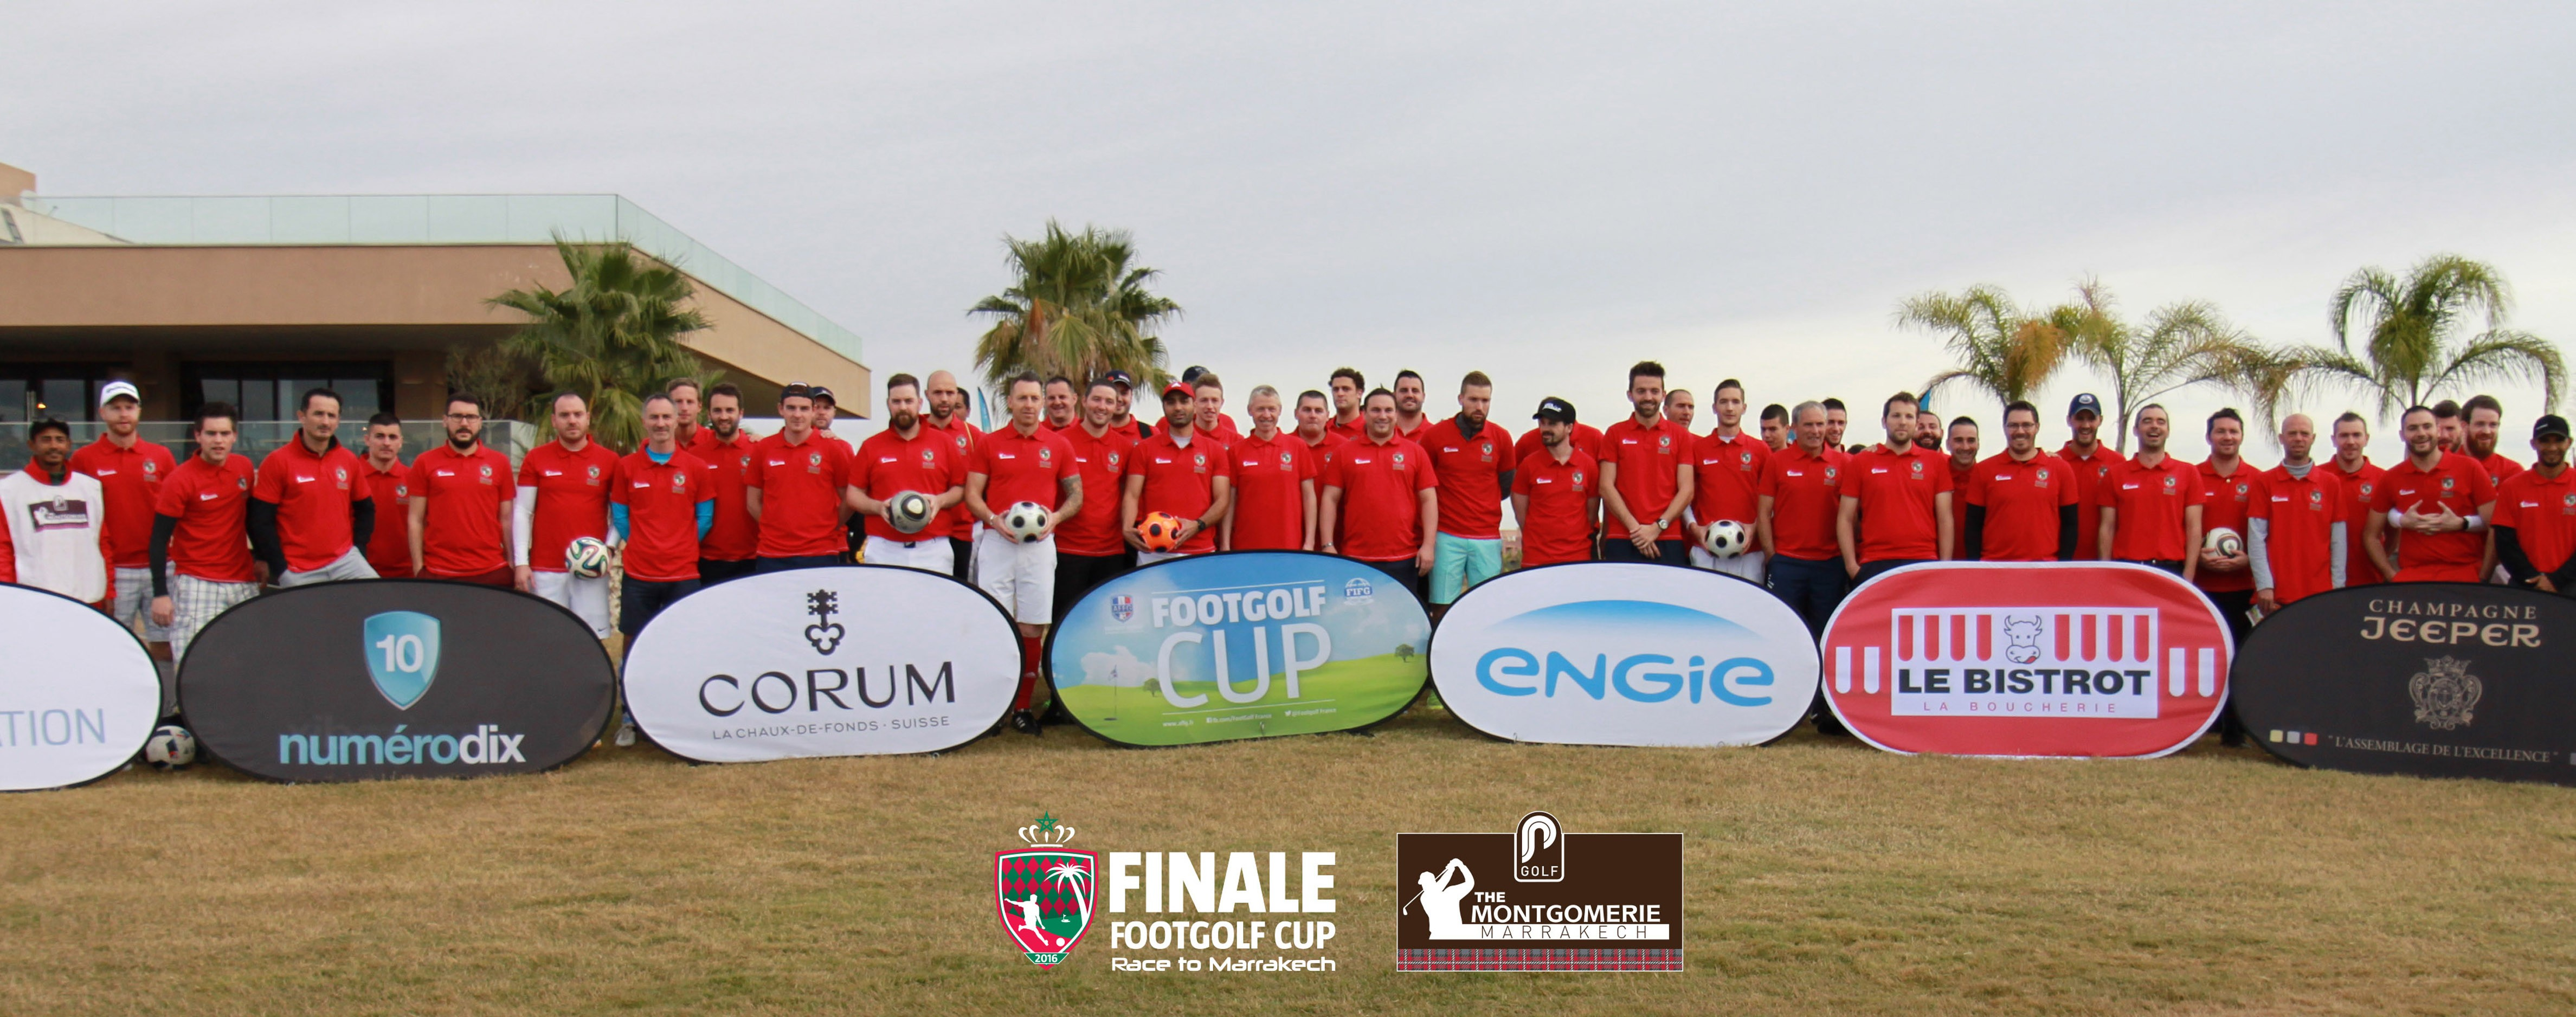 Finale-footgolf-cup-2016